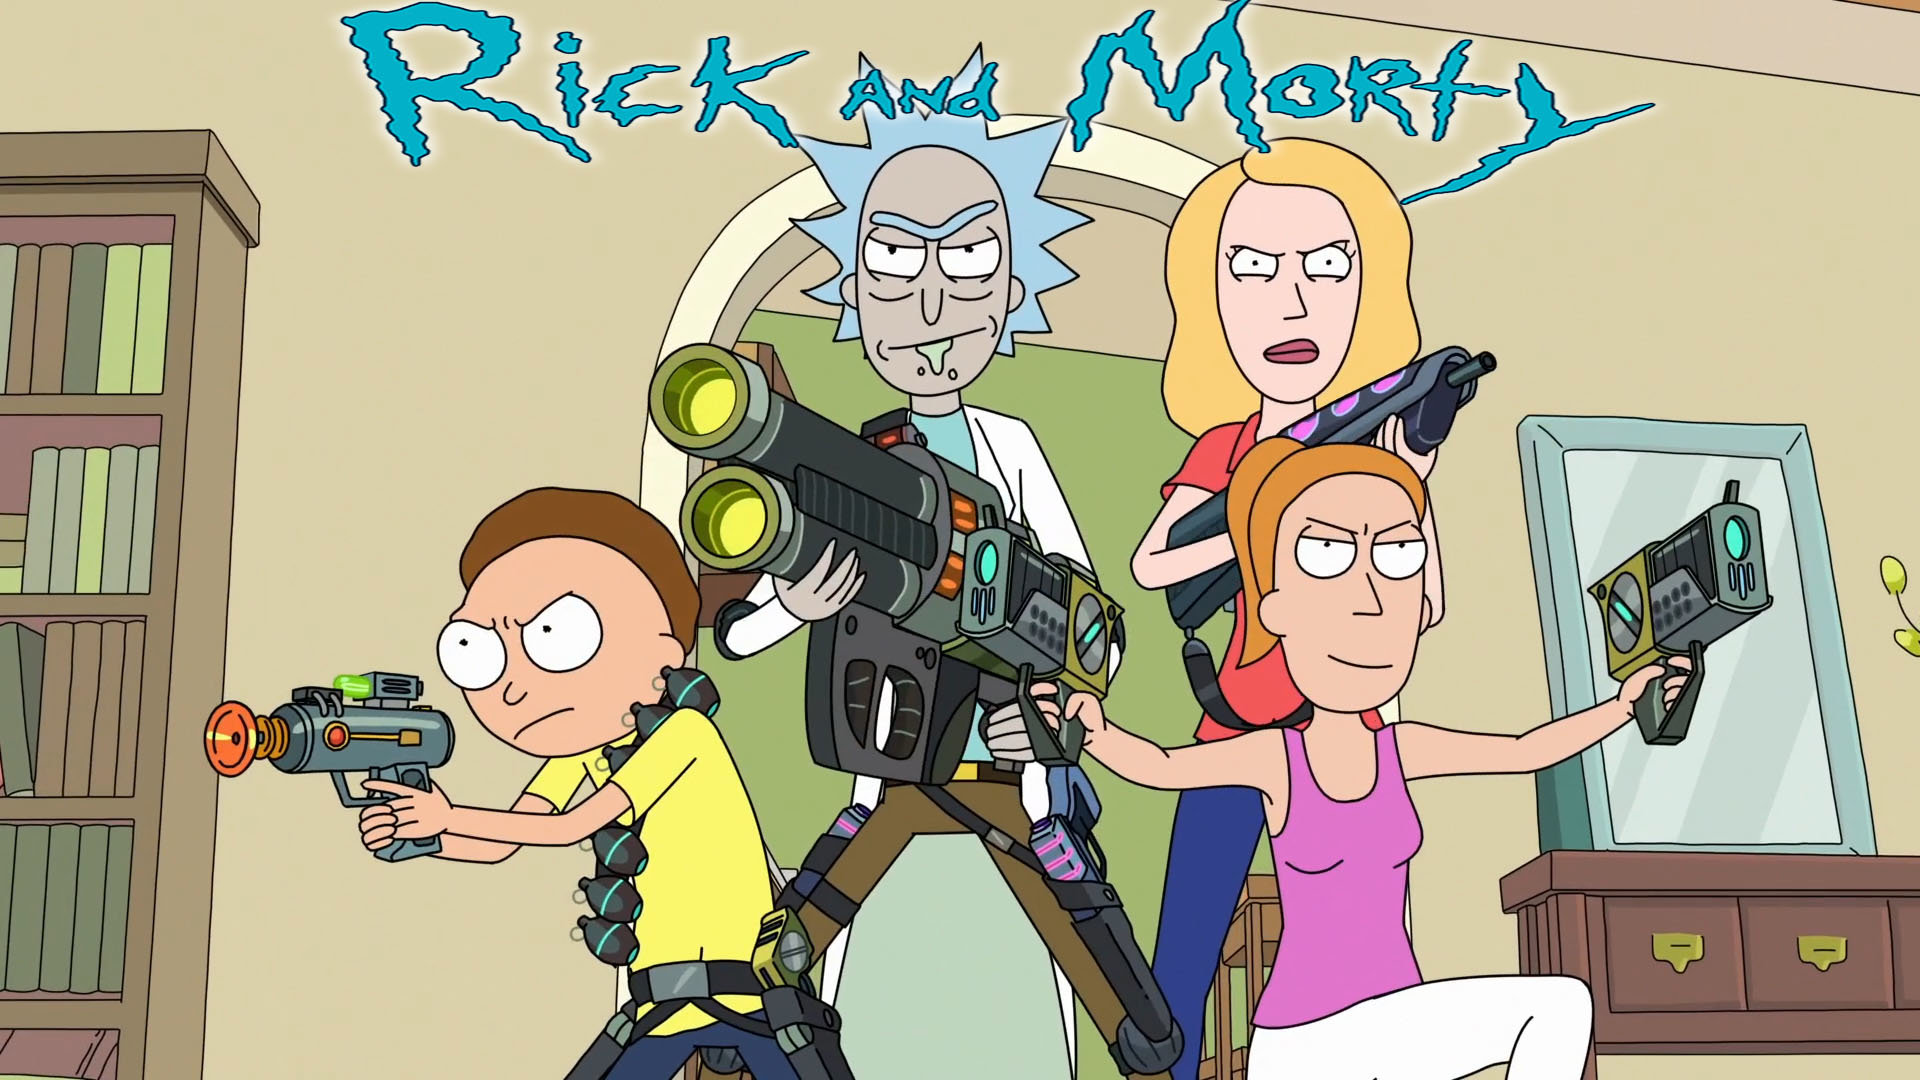 rick and morty壁紙,漫画,アニメ,アニメーション,図,楽しい